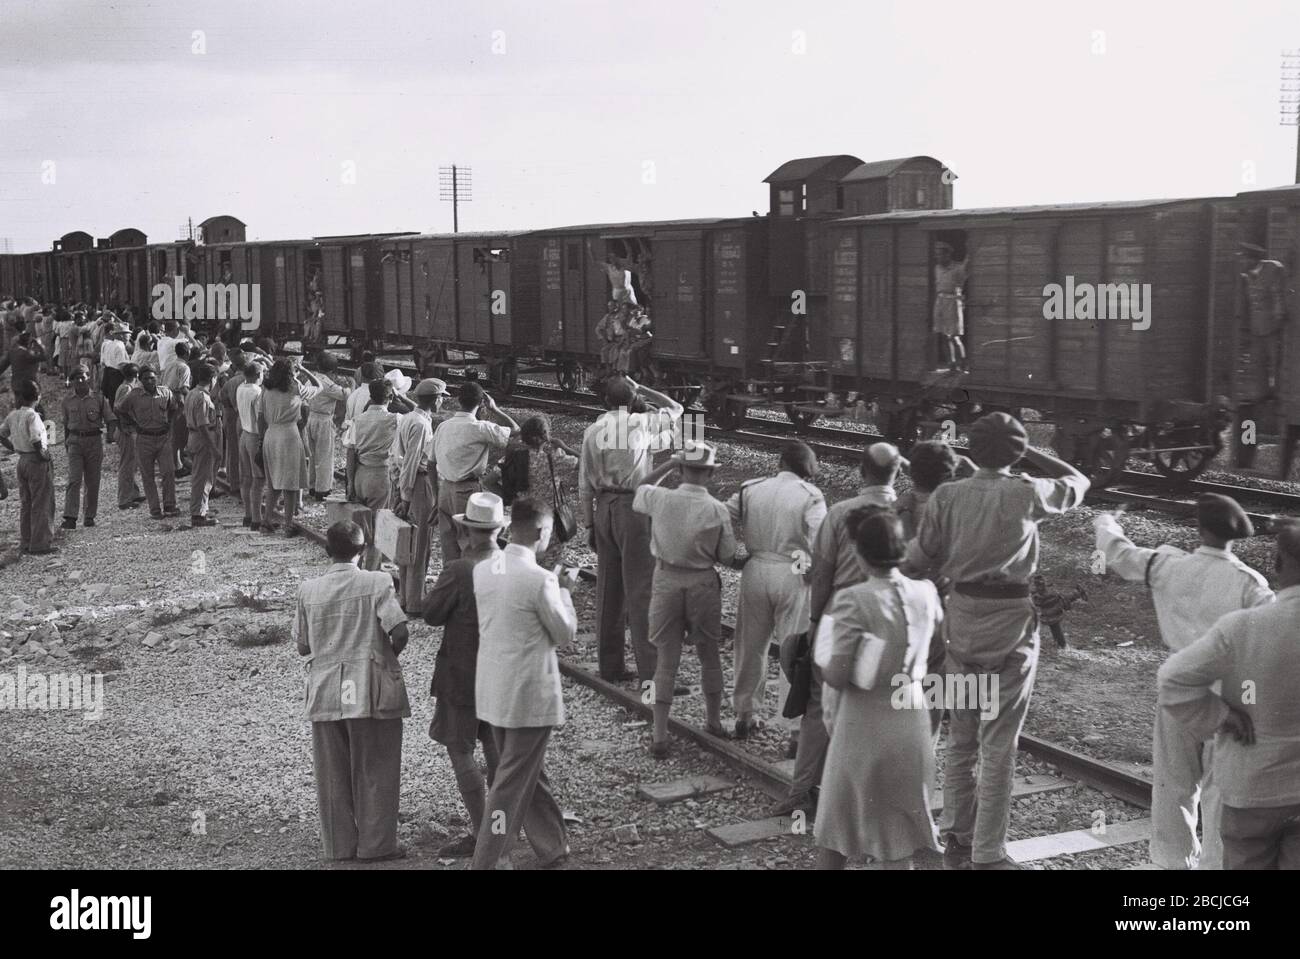 English Jewish Refugees From Europe Being Transferred By Train From The Haifa Port To The Reception Camp At Atlit I U O U O I C O U I C O U E I O U E O E U U U O O I U U O I I I